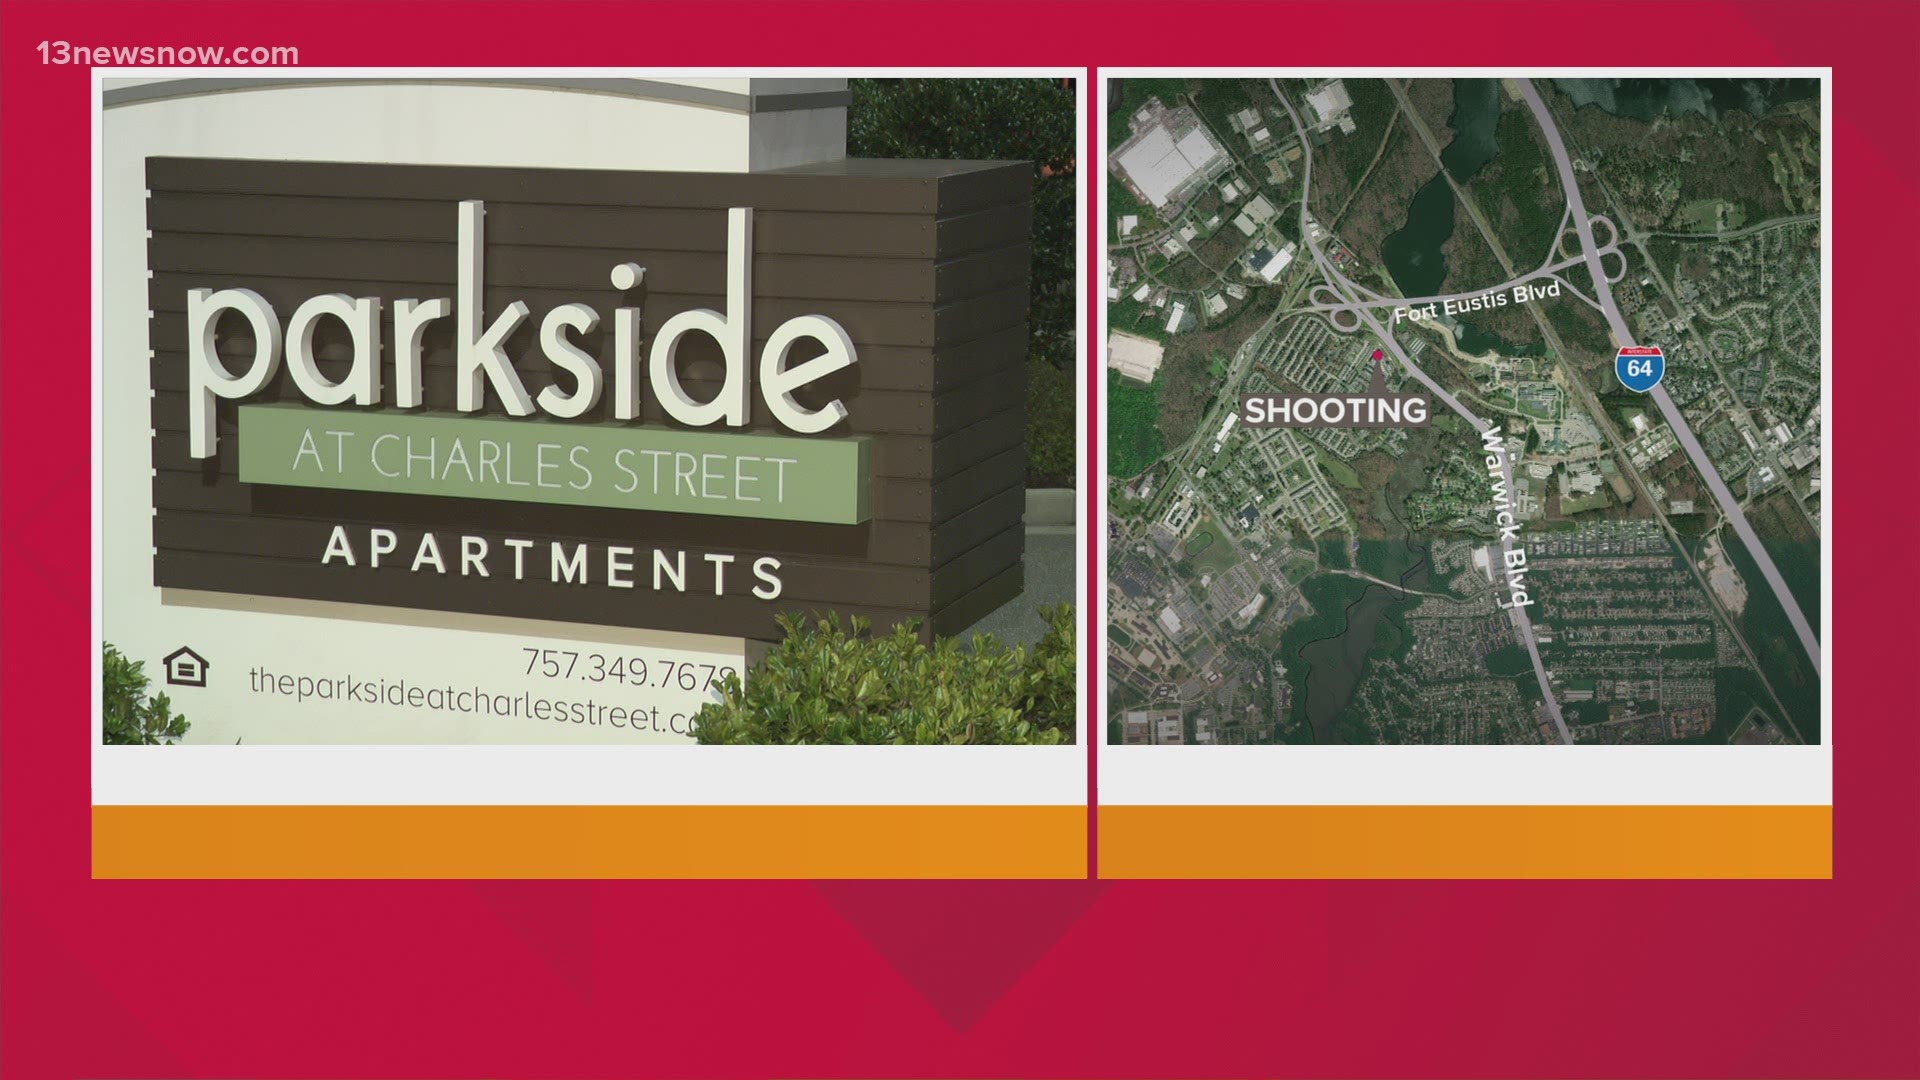 A man was found suffering from gunshot wounds in the parking lot of Parkside at Charles Street Apartments. He died at the scene.